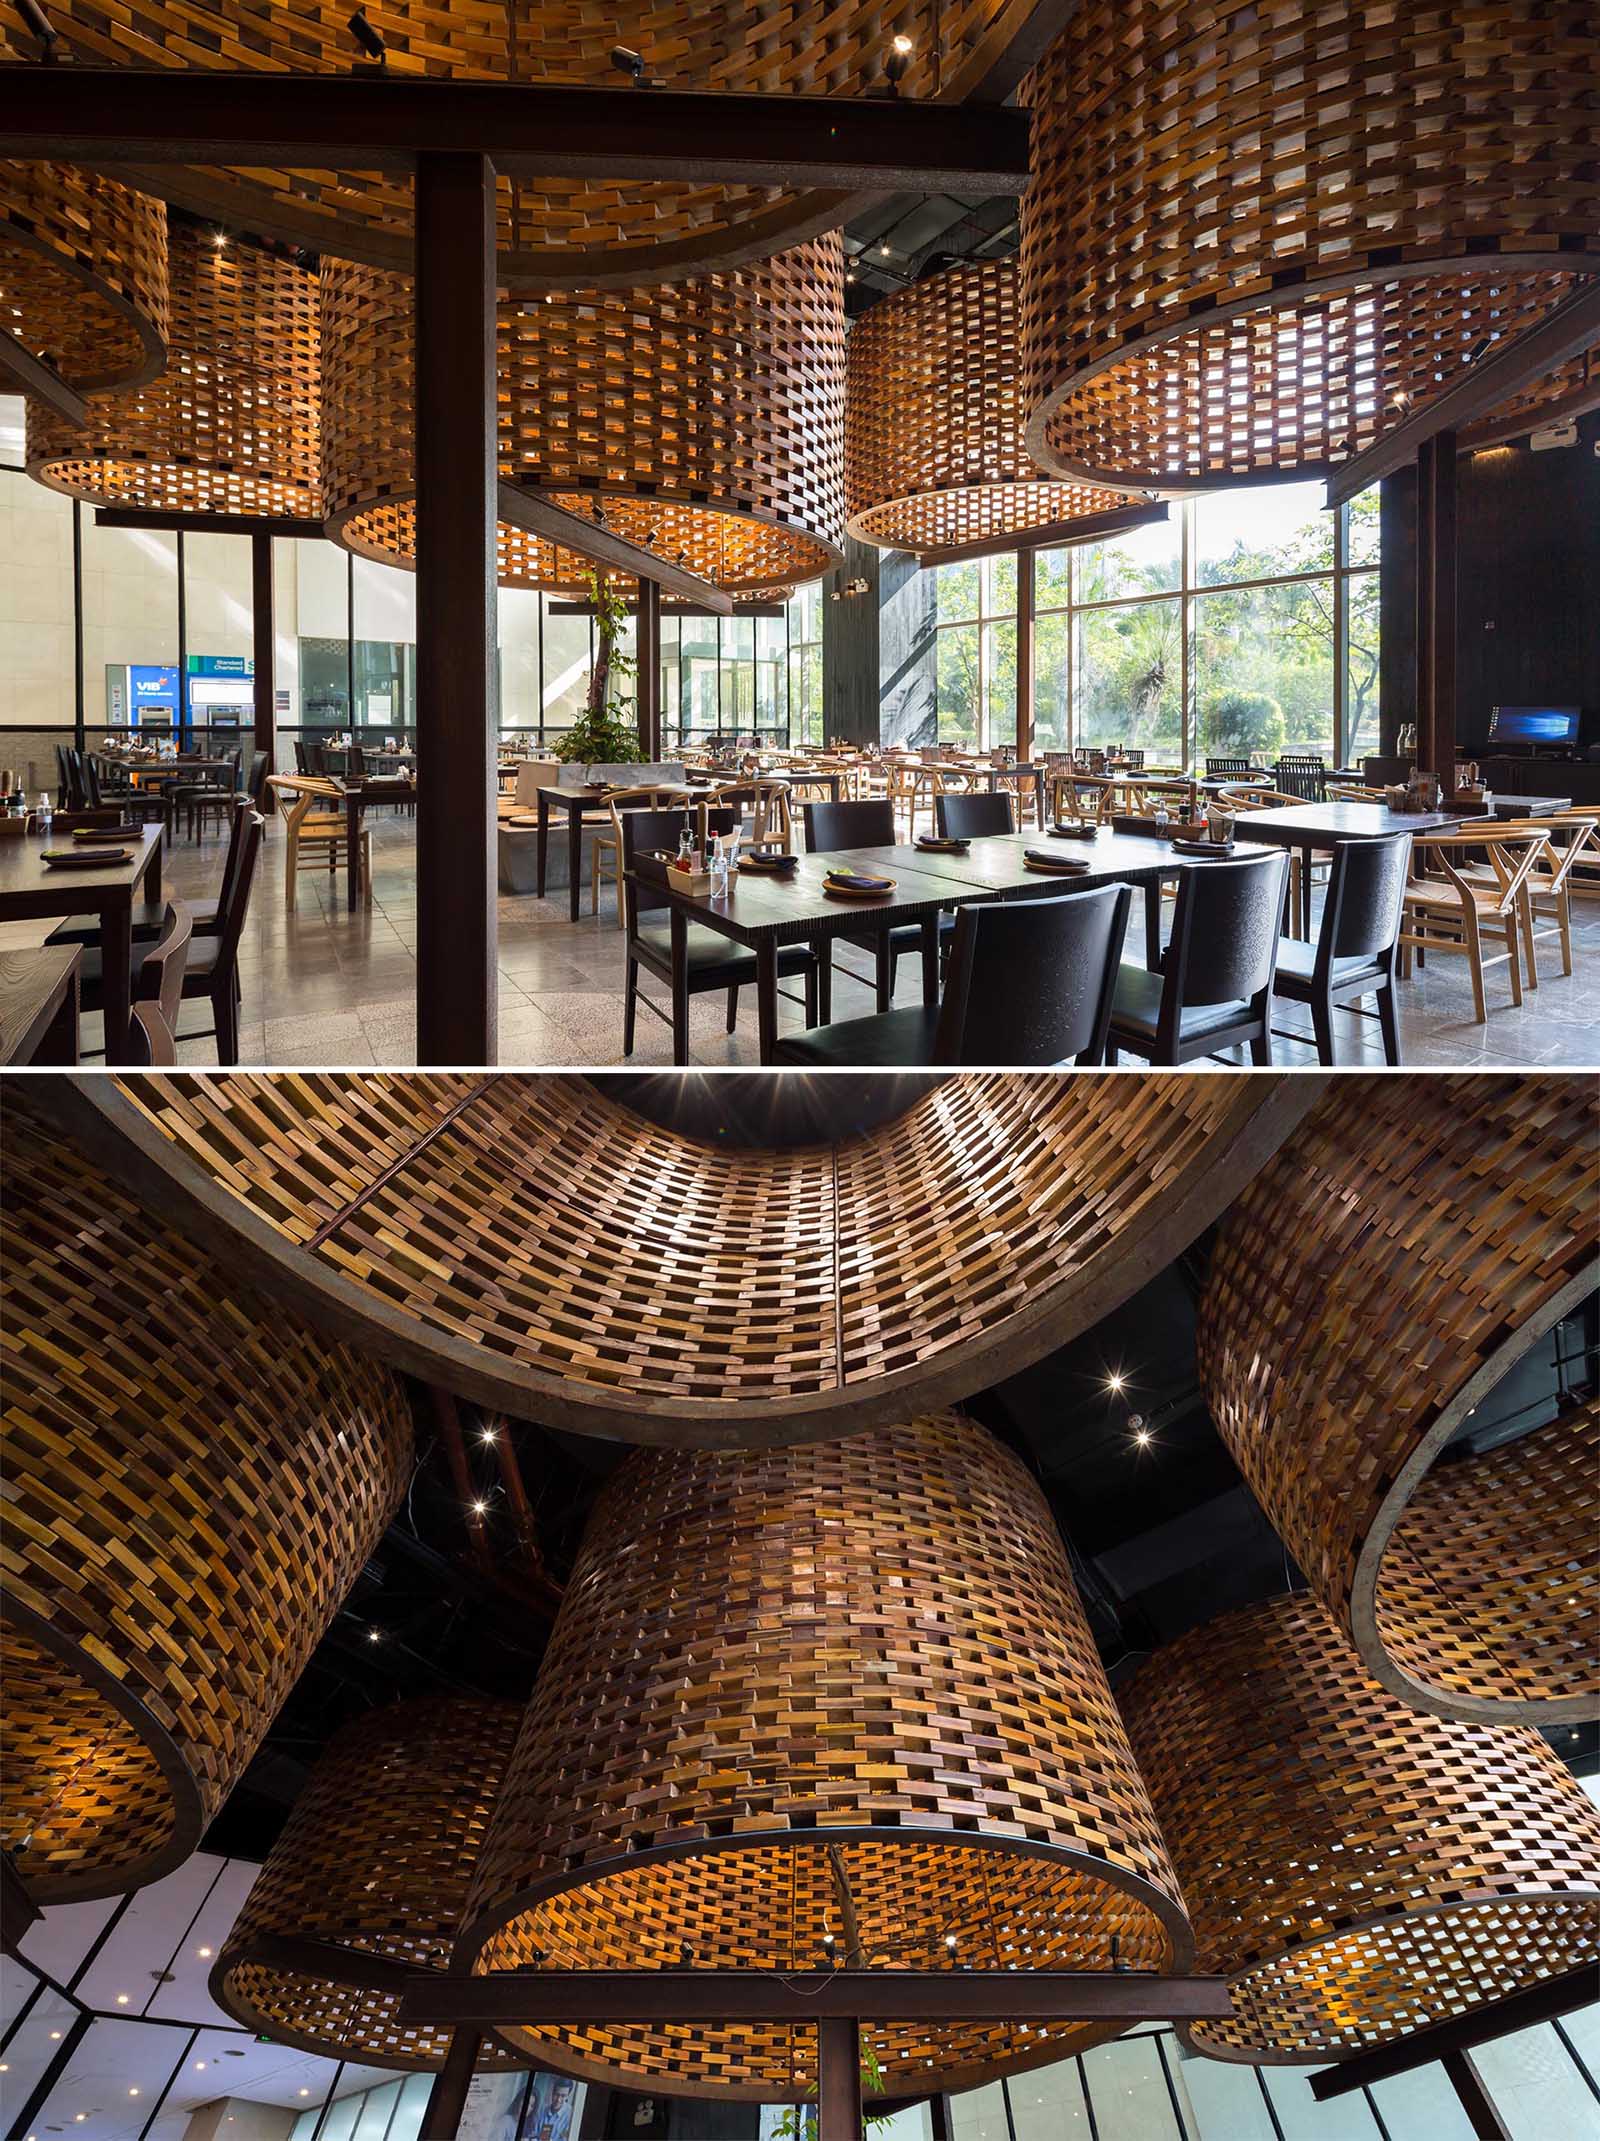 A modern restaurant with large sculptural cylinders made from wood bricks.